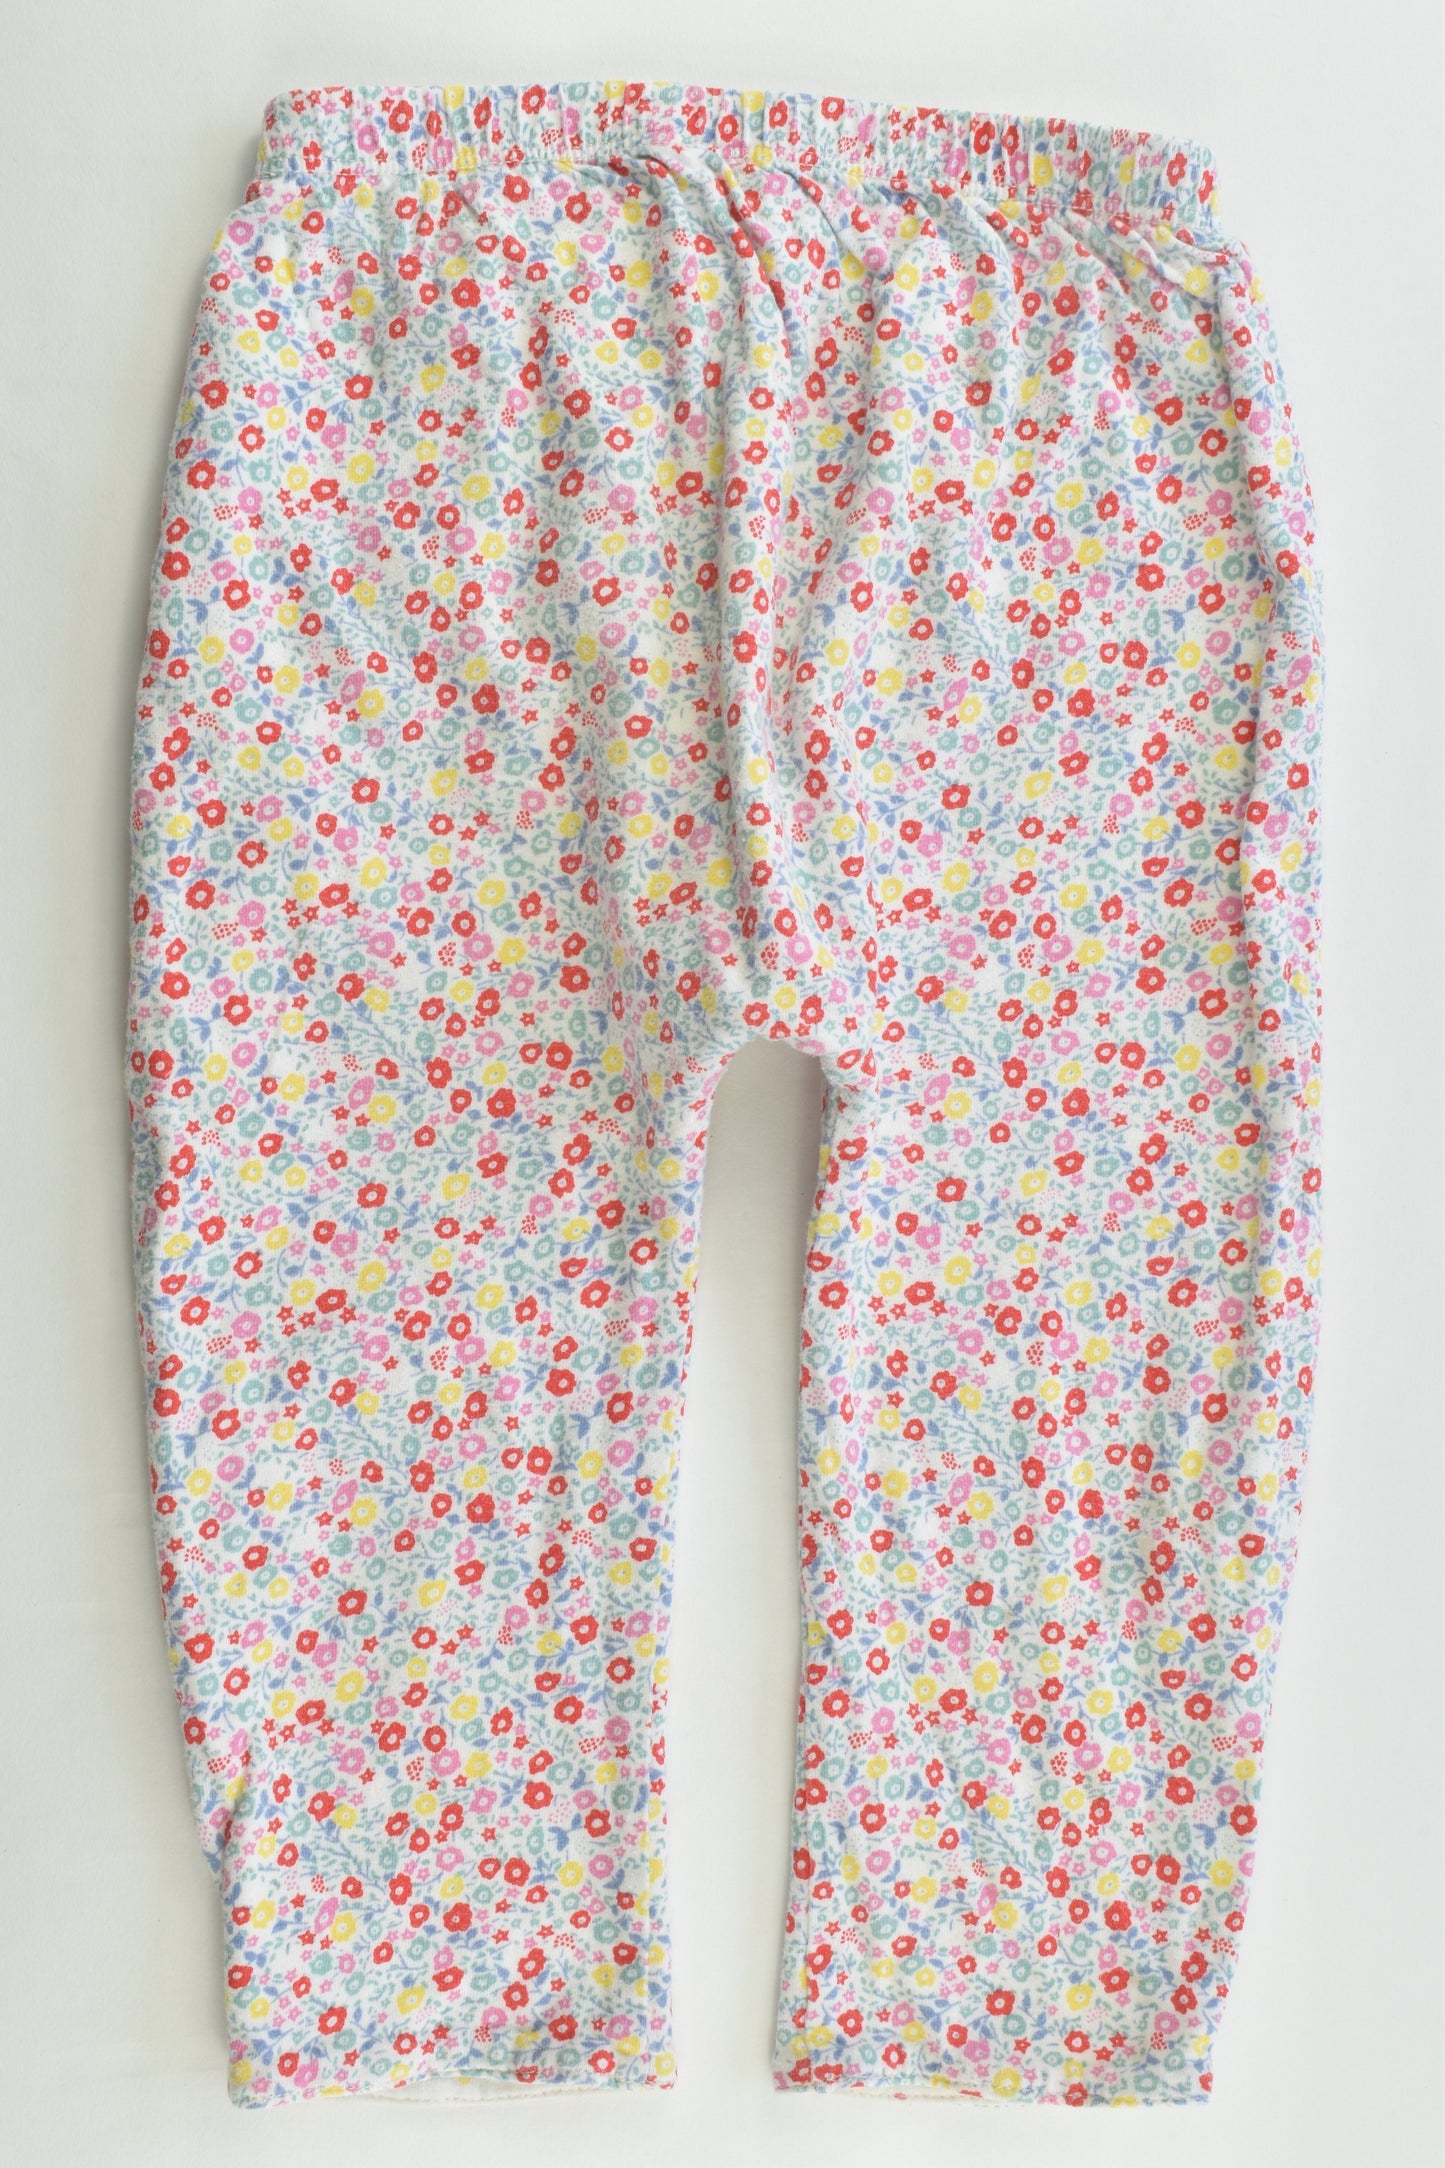 Baby Gap Size 18-24 months Reversible Liberty Print/Dotted Pants